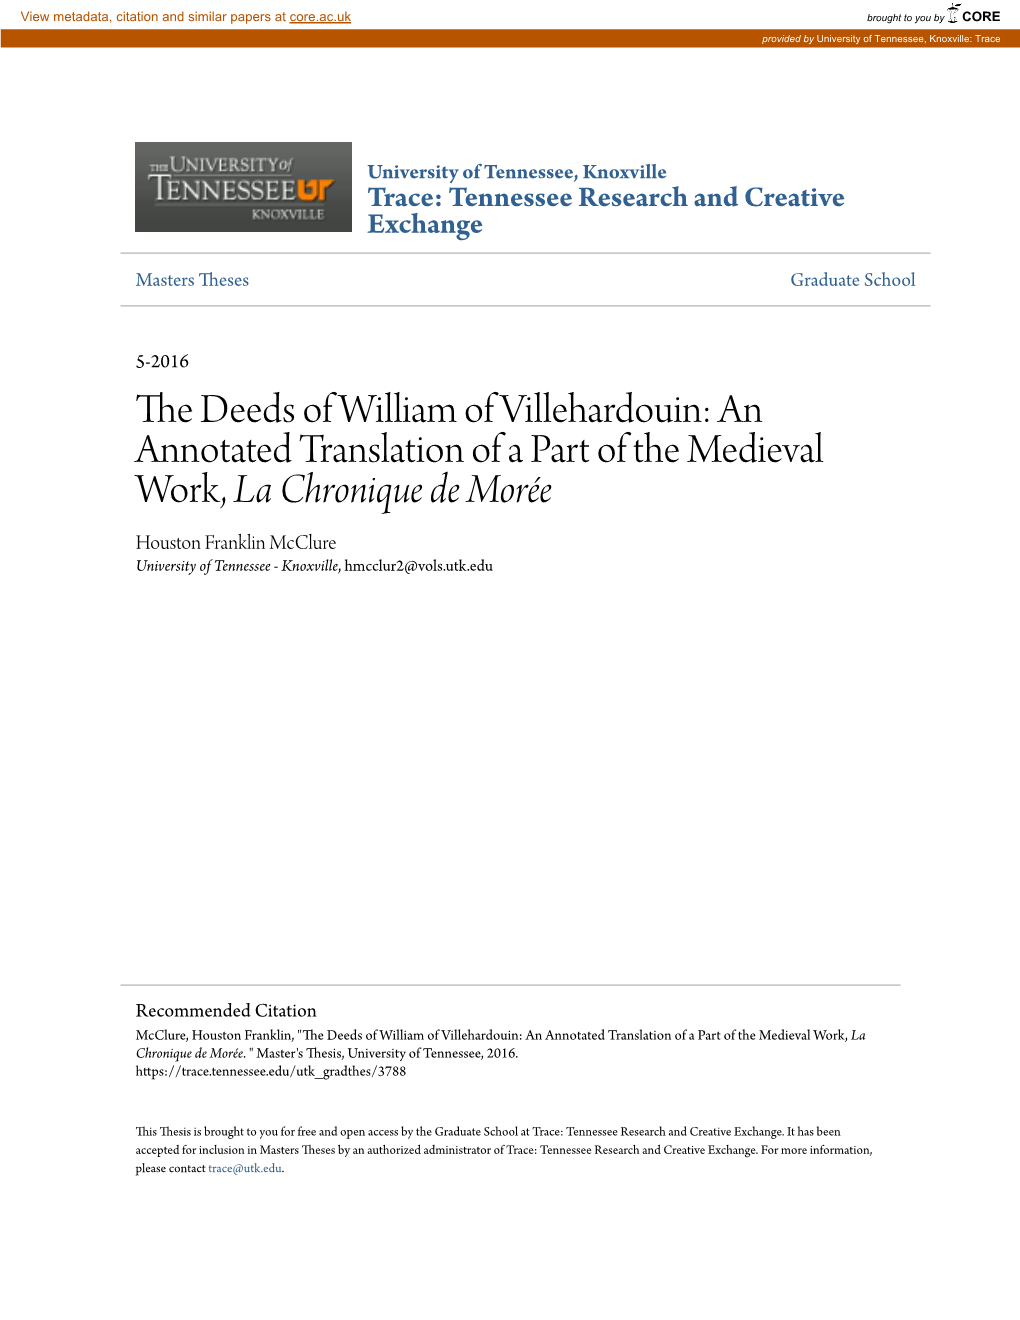 The Deeds of William of Villehardouin: an Annotated Translation of a Part of the Medieval Work, La Chronique De Morée